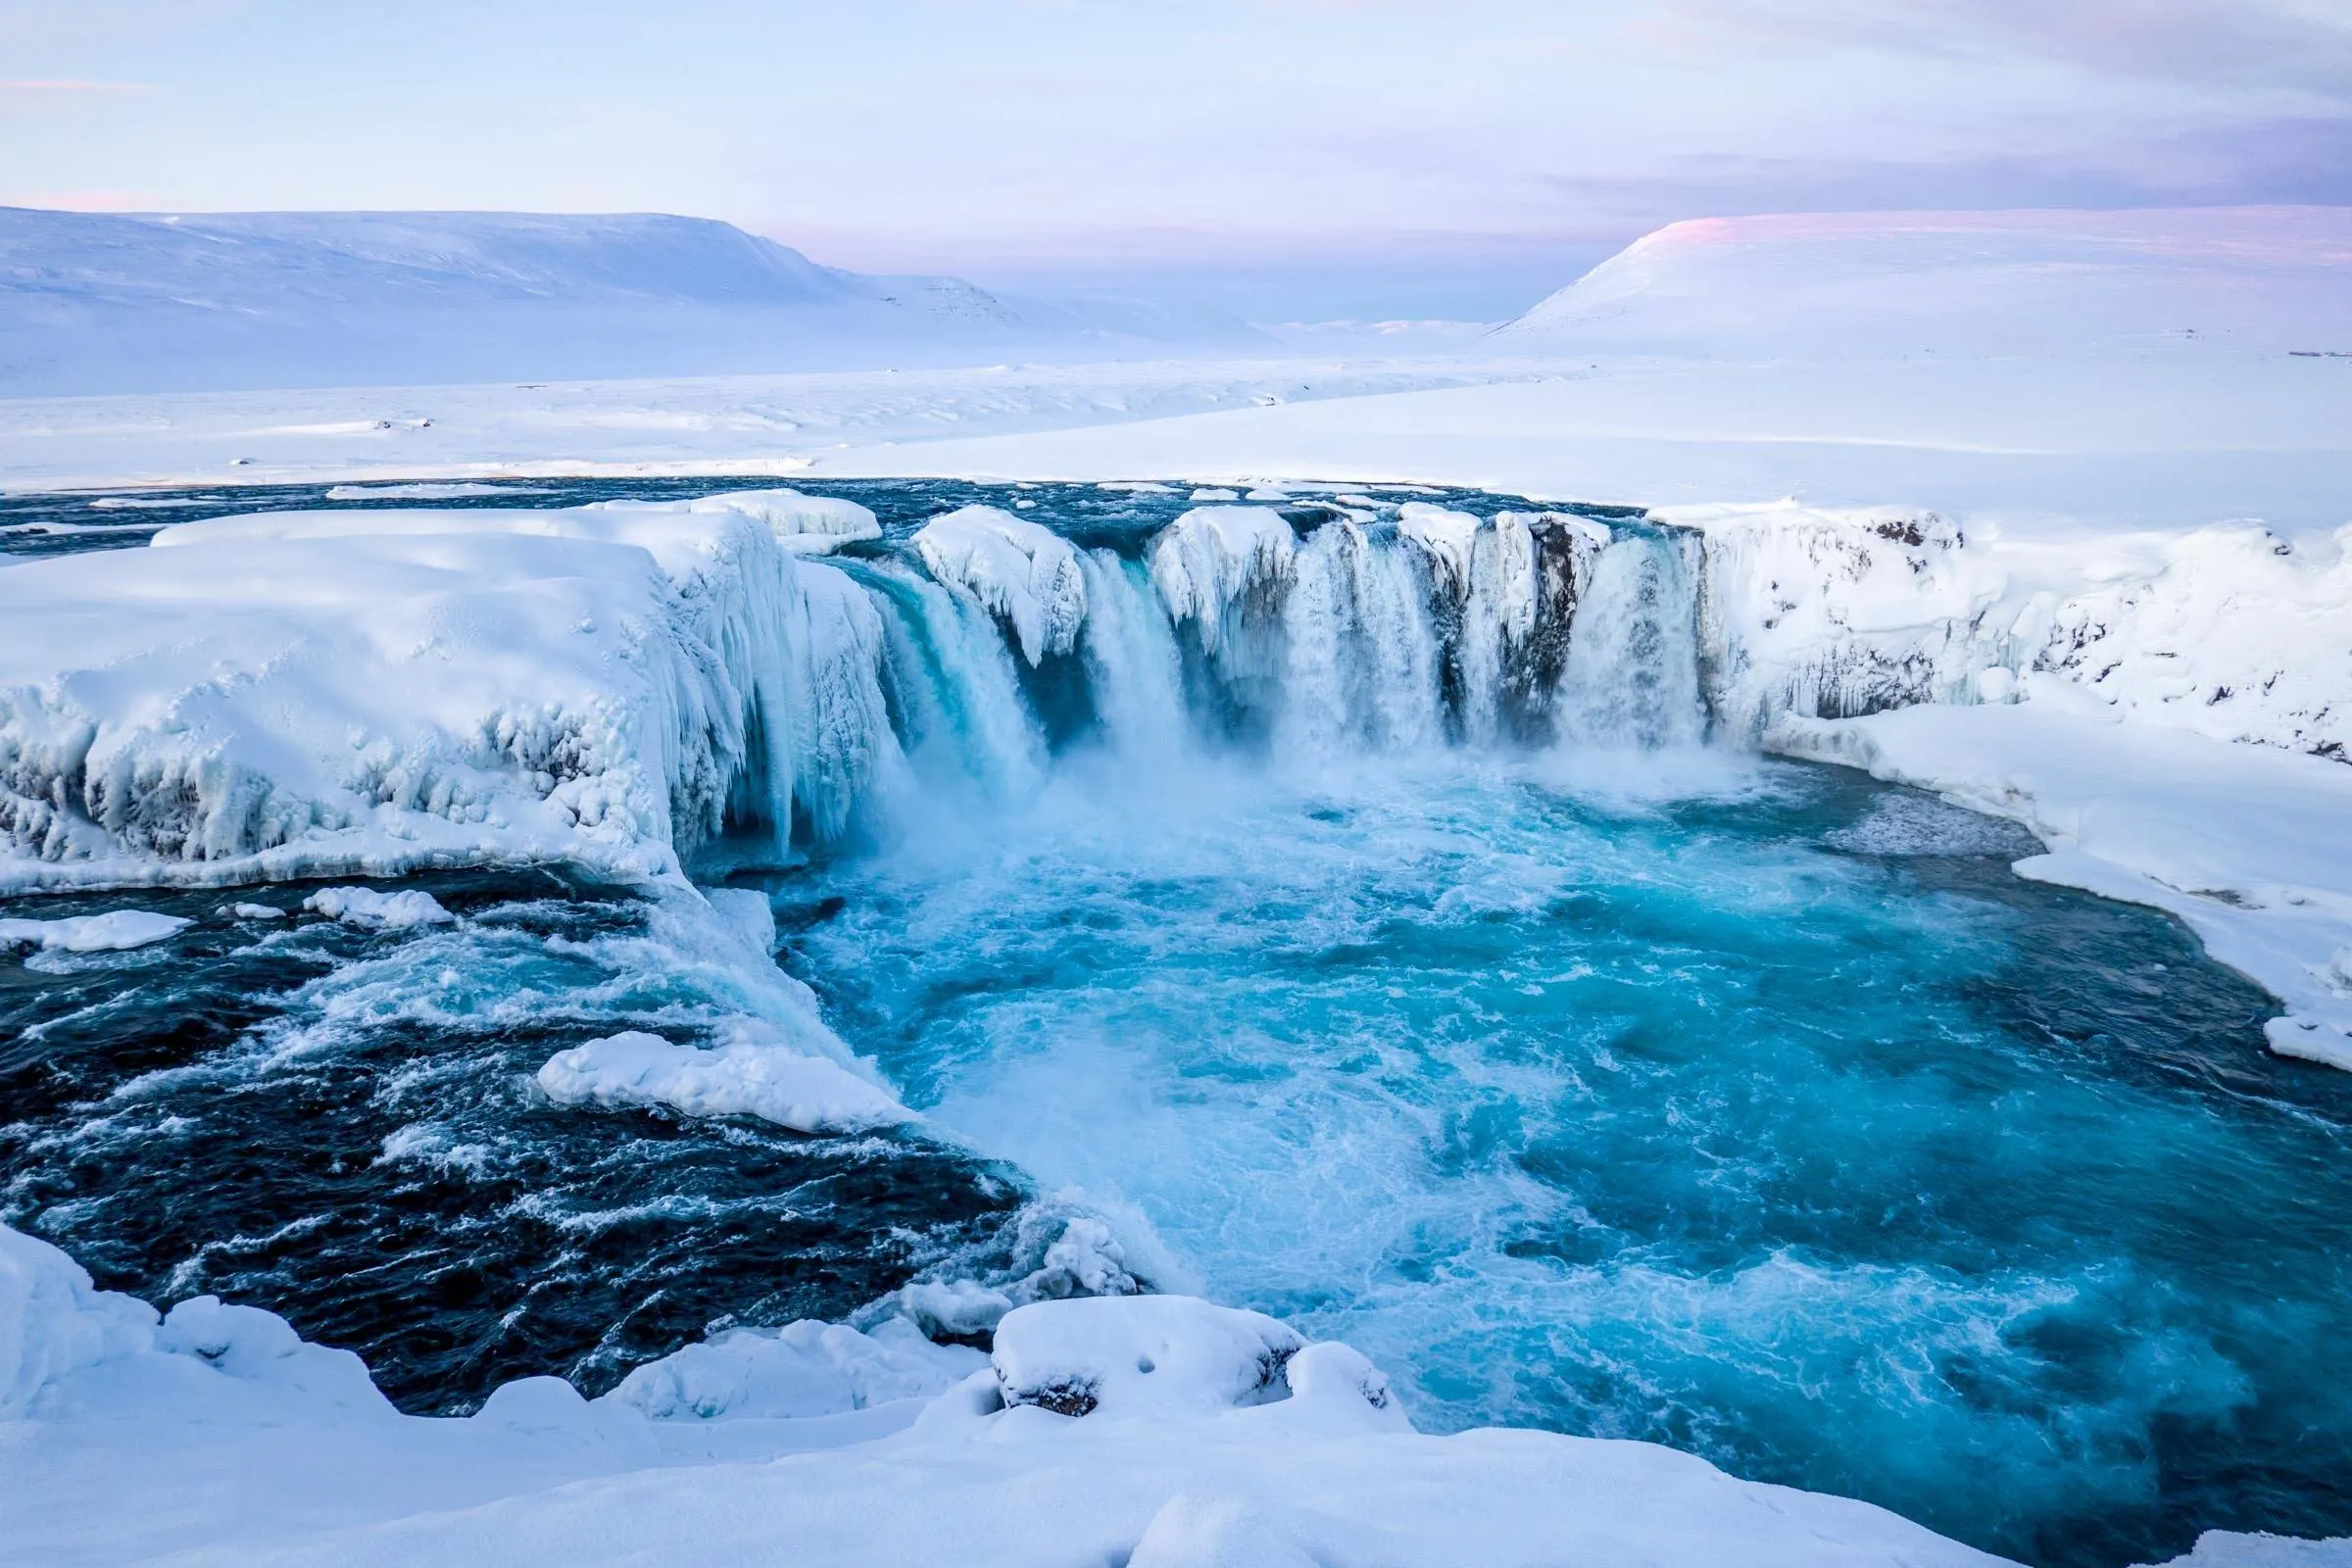 The Godafoss waterfall in the winter with snow and ice at sunrise.